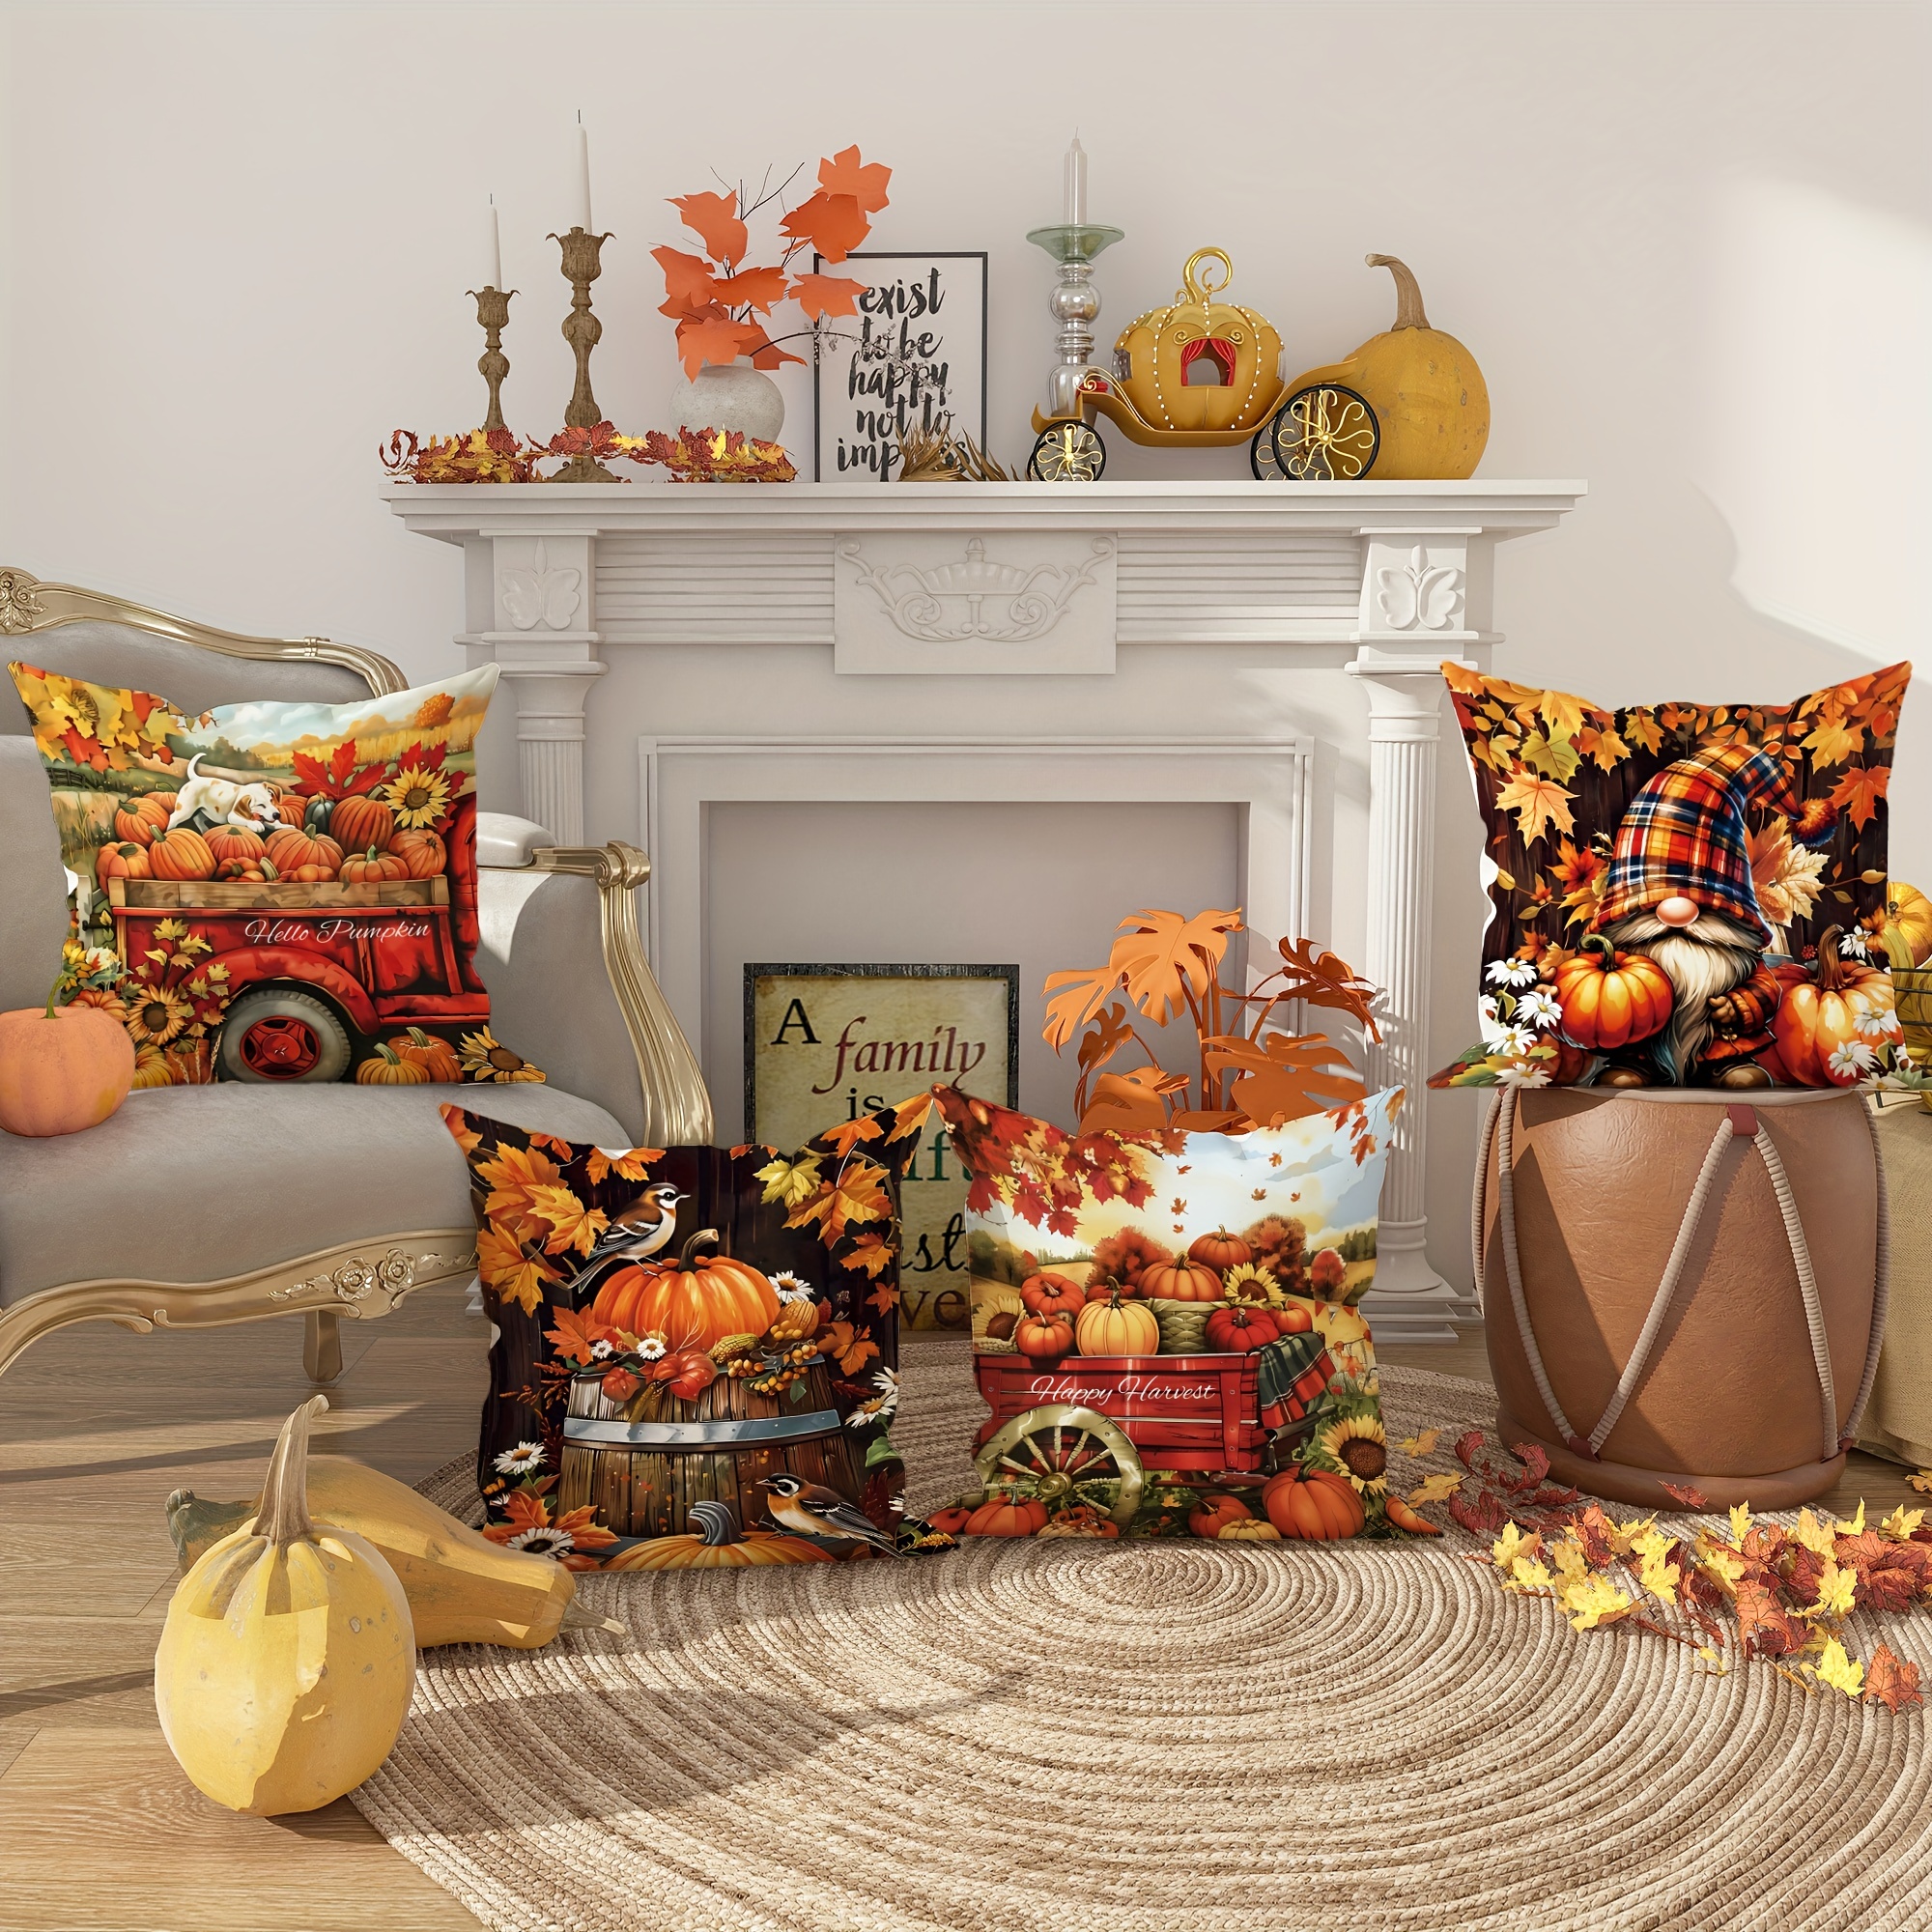 

4-piece Velvet Fall Thanksgiving Throw Pillow Covers - Farmhouse Style With Truck, Gnome & Pumpkin Designs, 18x18 Inch, Perfect For Autumn Home Decor